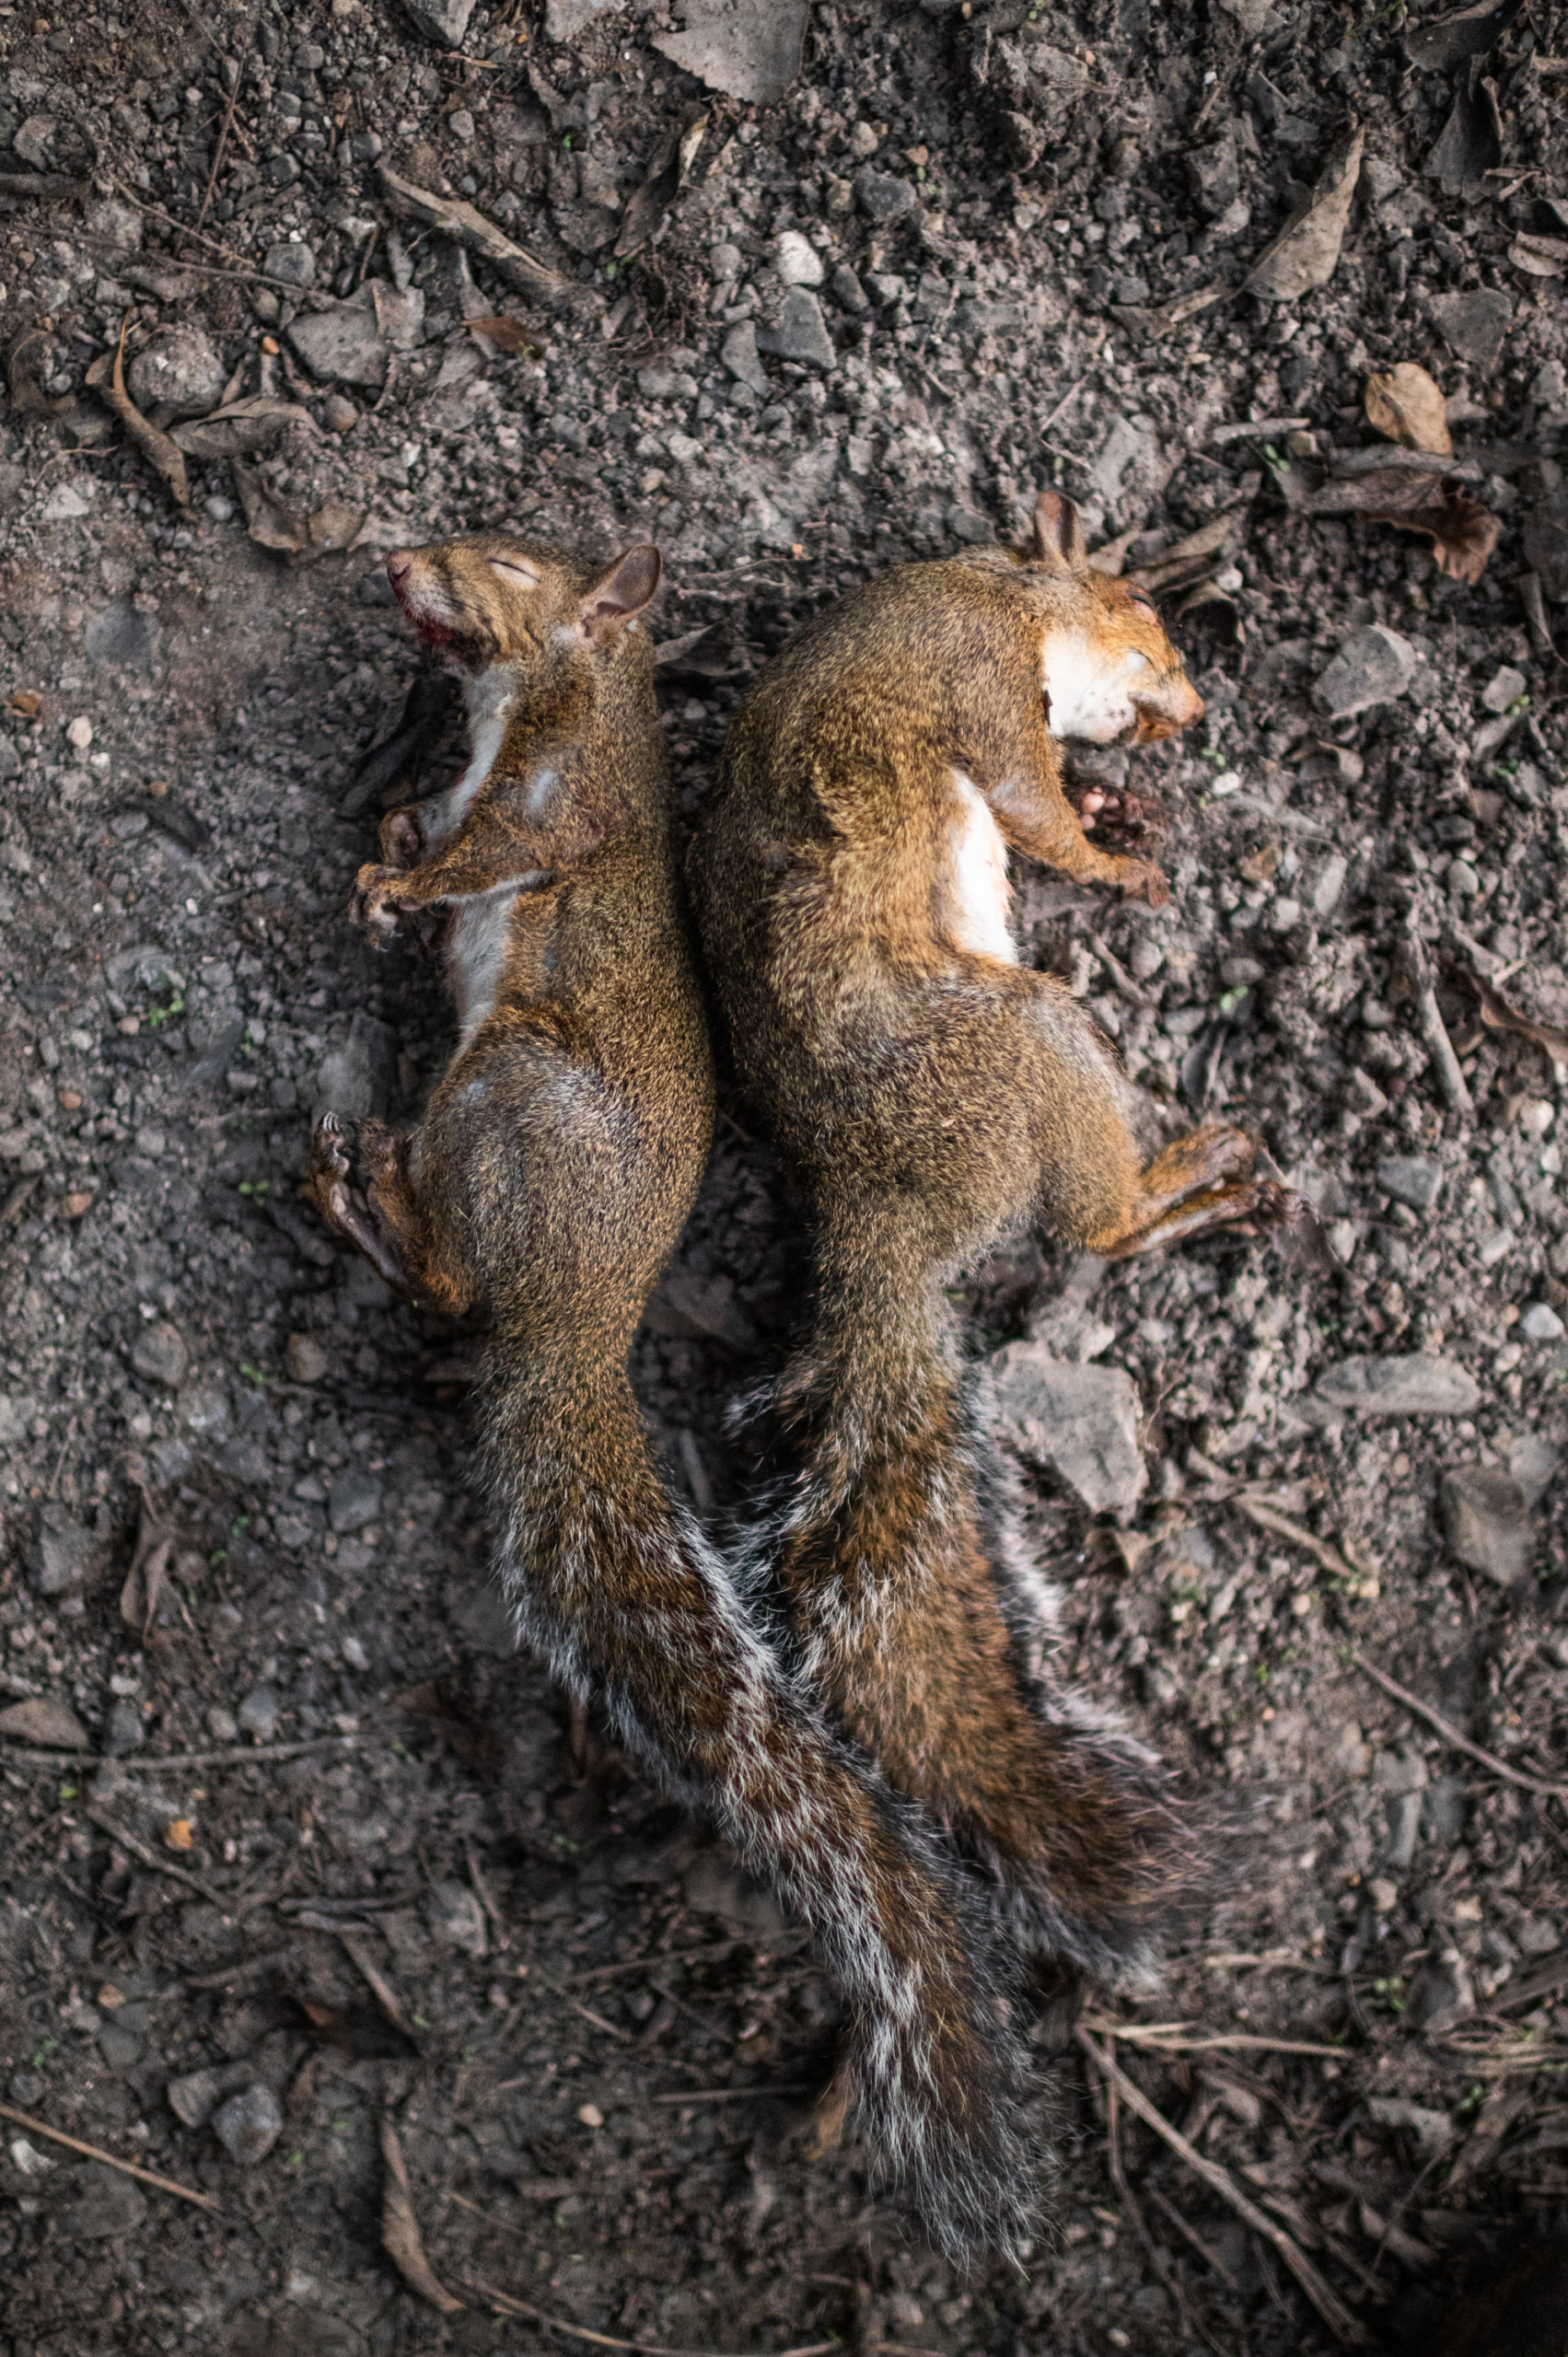 Two squirrels harvested on opening day of hunting season